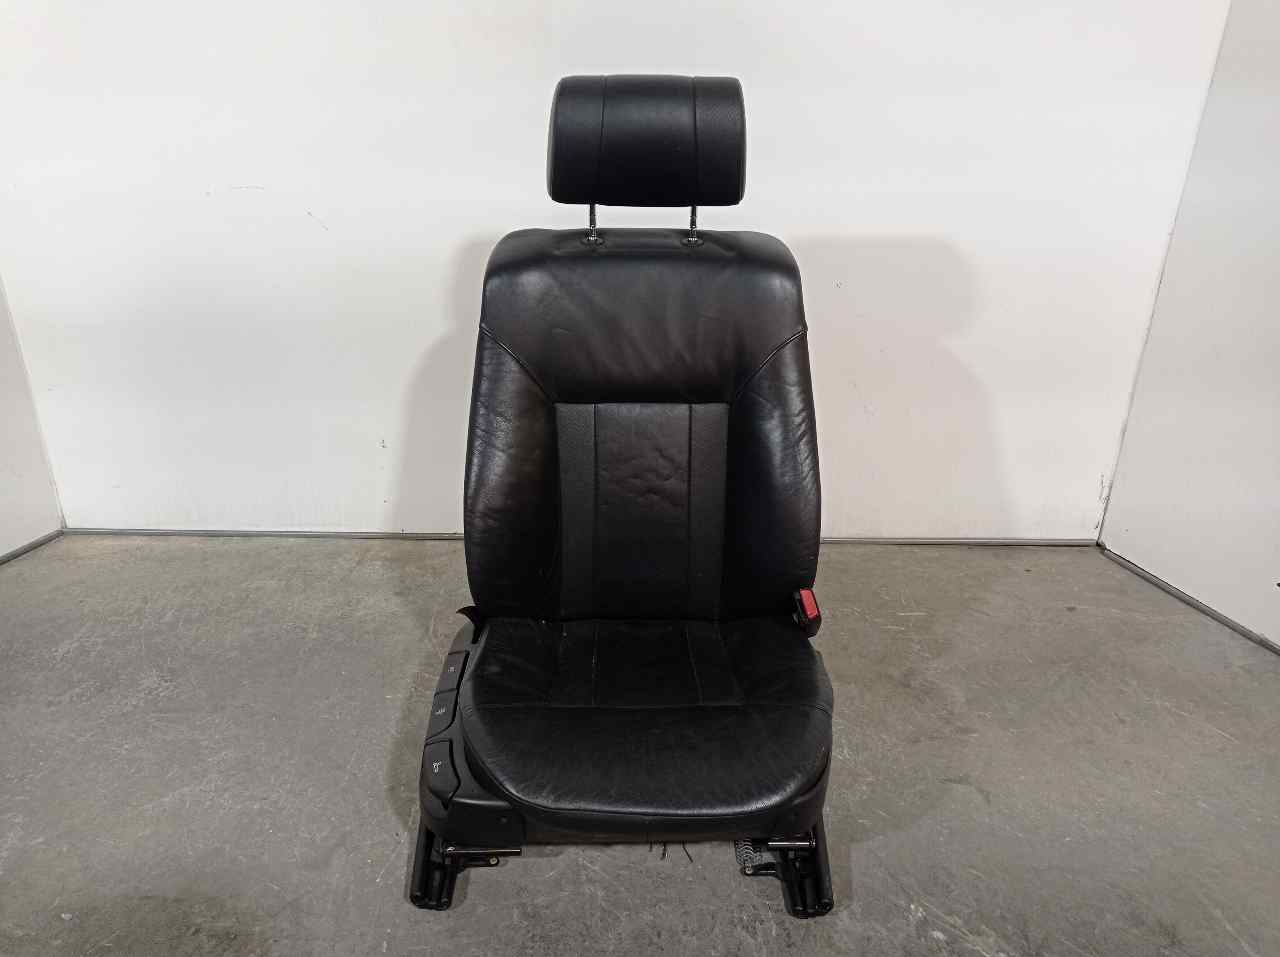 BMW 5 Series E39 (1995-2004) Front Right Seat 4739480, CUERONEGRO, 4PUERTAS 20802490